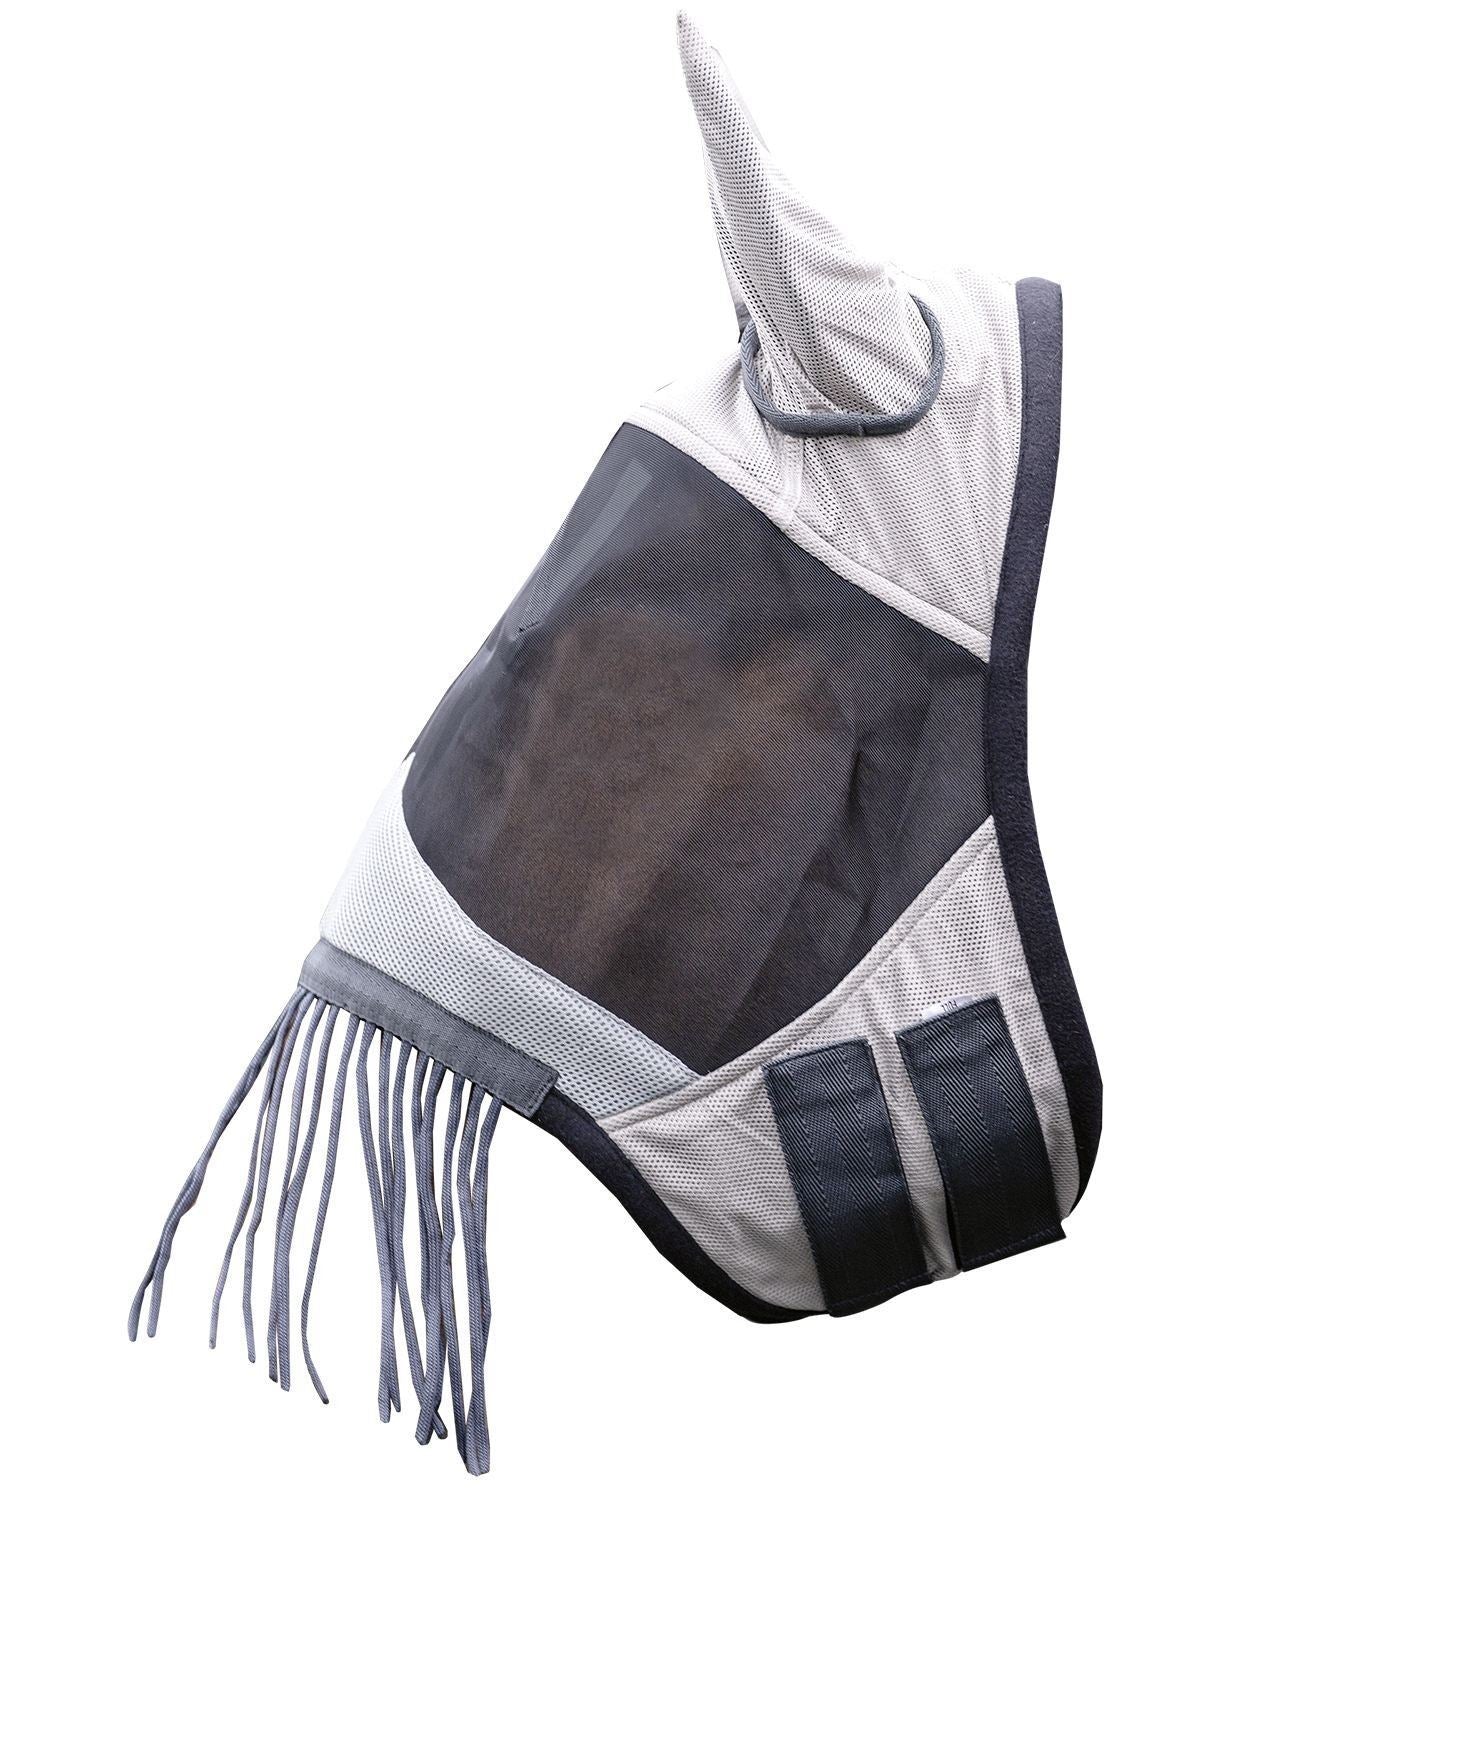 HKM Antifly Mask Fringes - Just Horse Riders